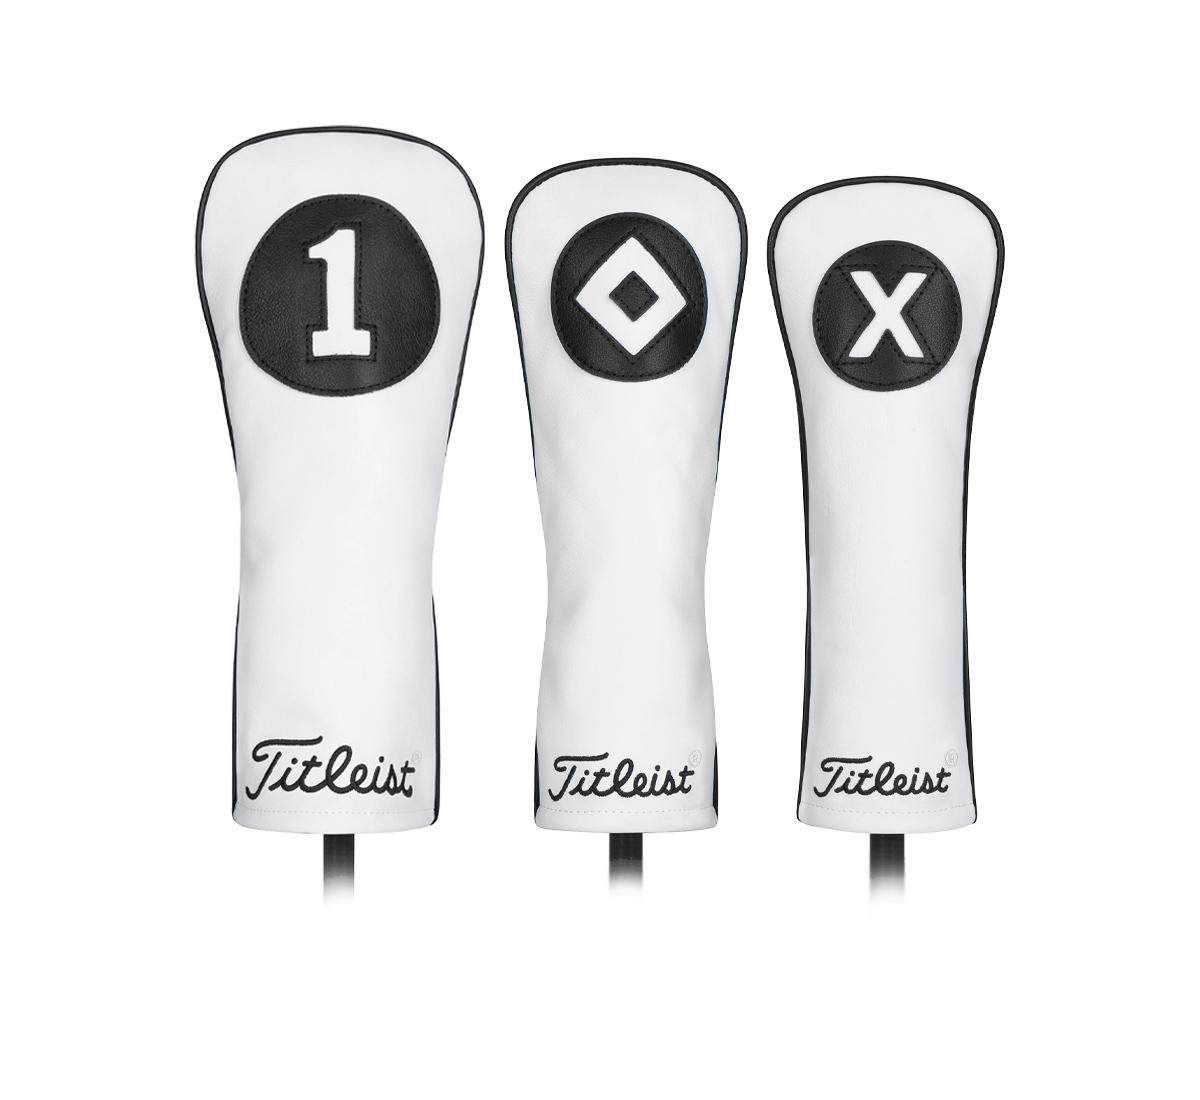 White & Black Leather Headcovers | Titleist Leather Headcovers